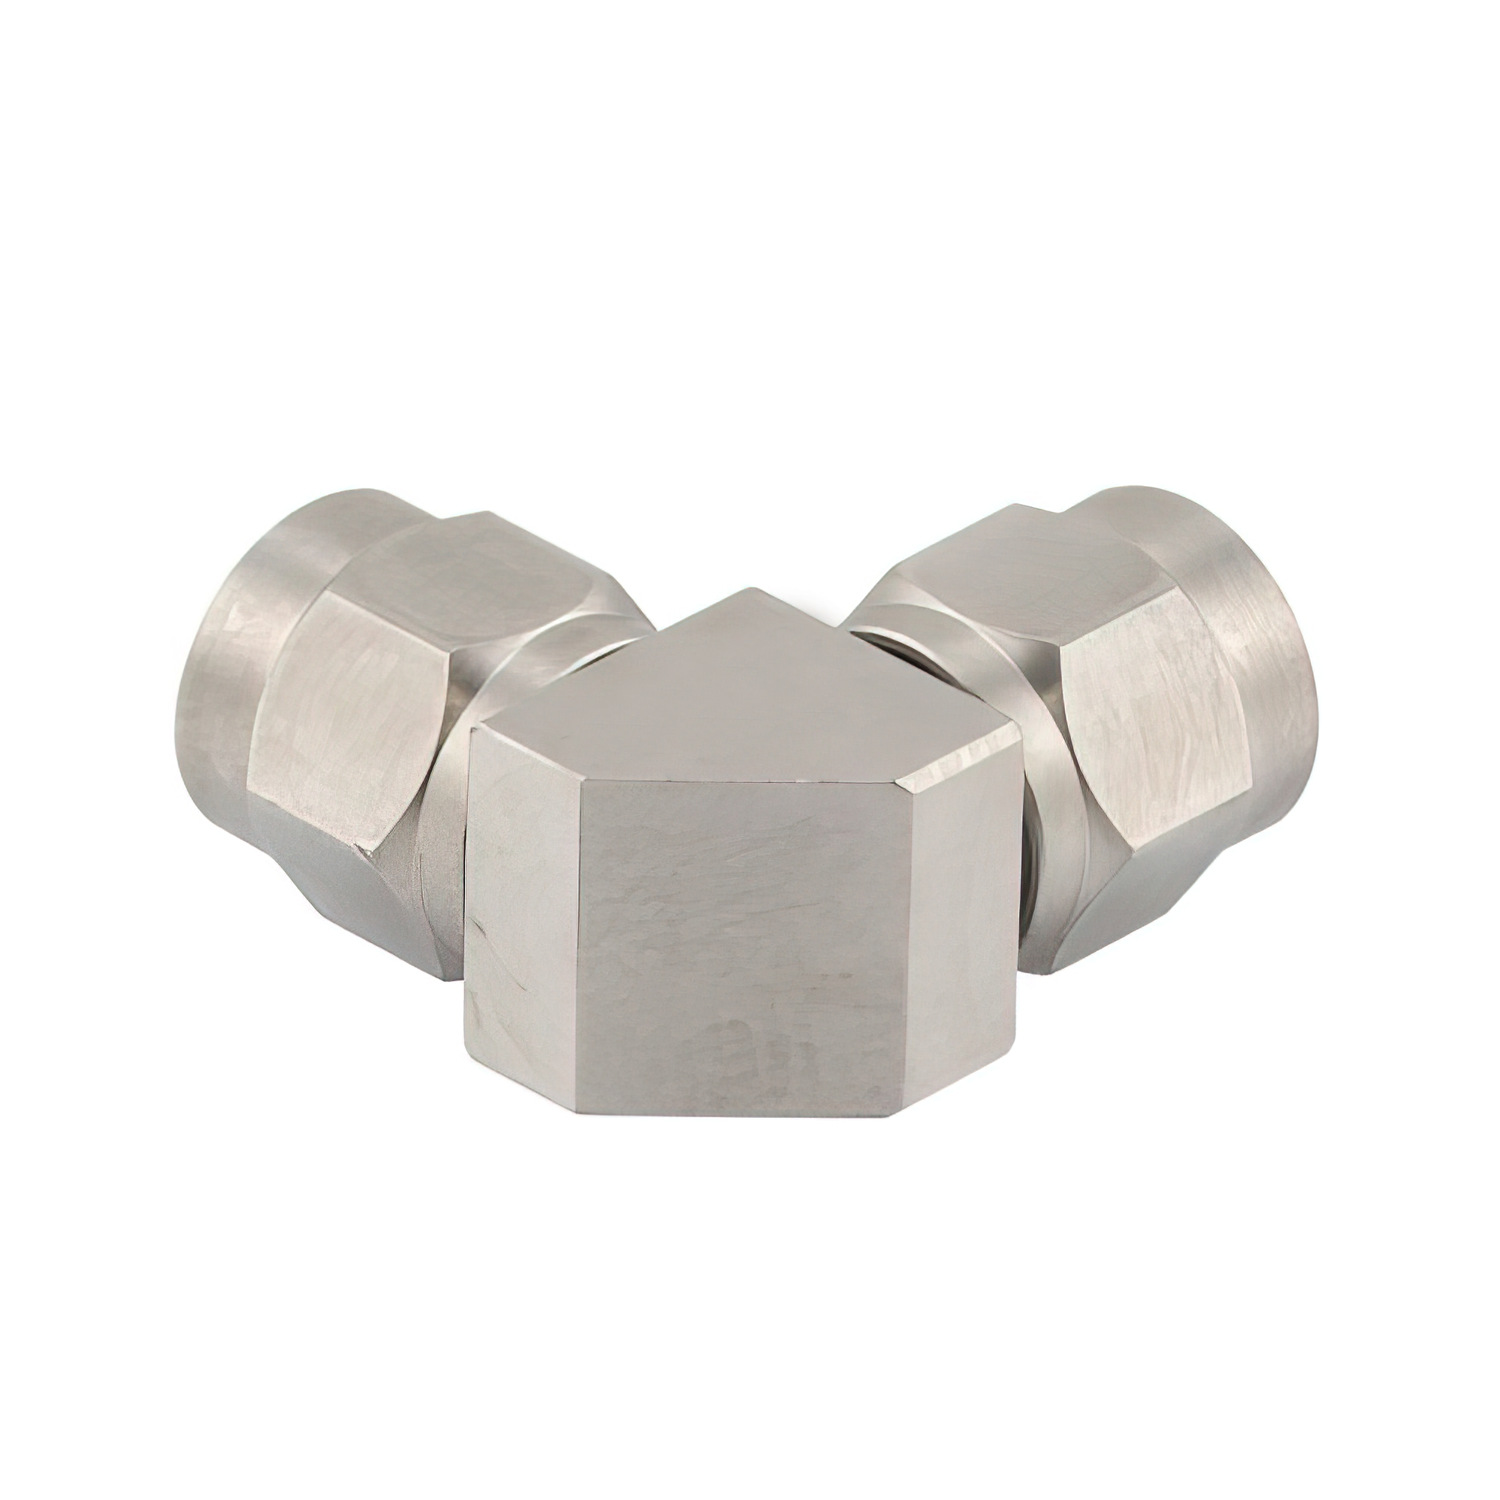 1.85mm Male to 2.4mm Male Miter Right Angle Adapter1